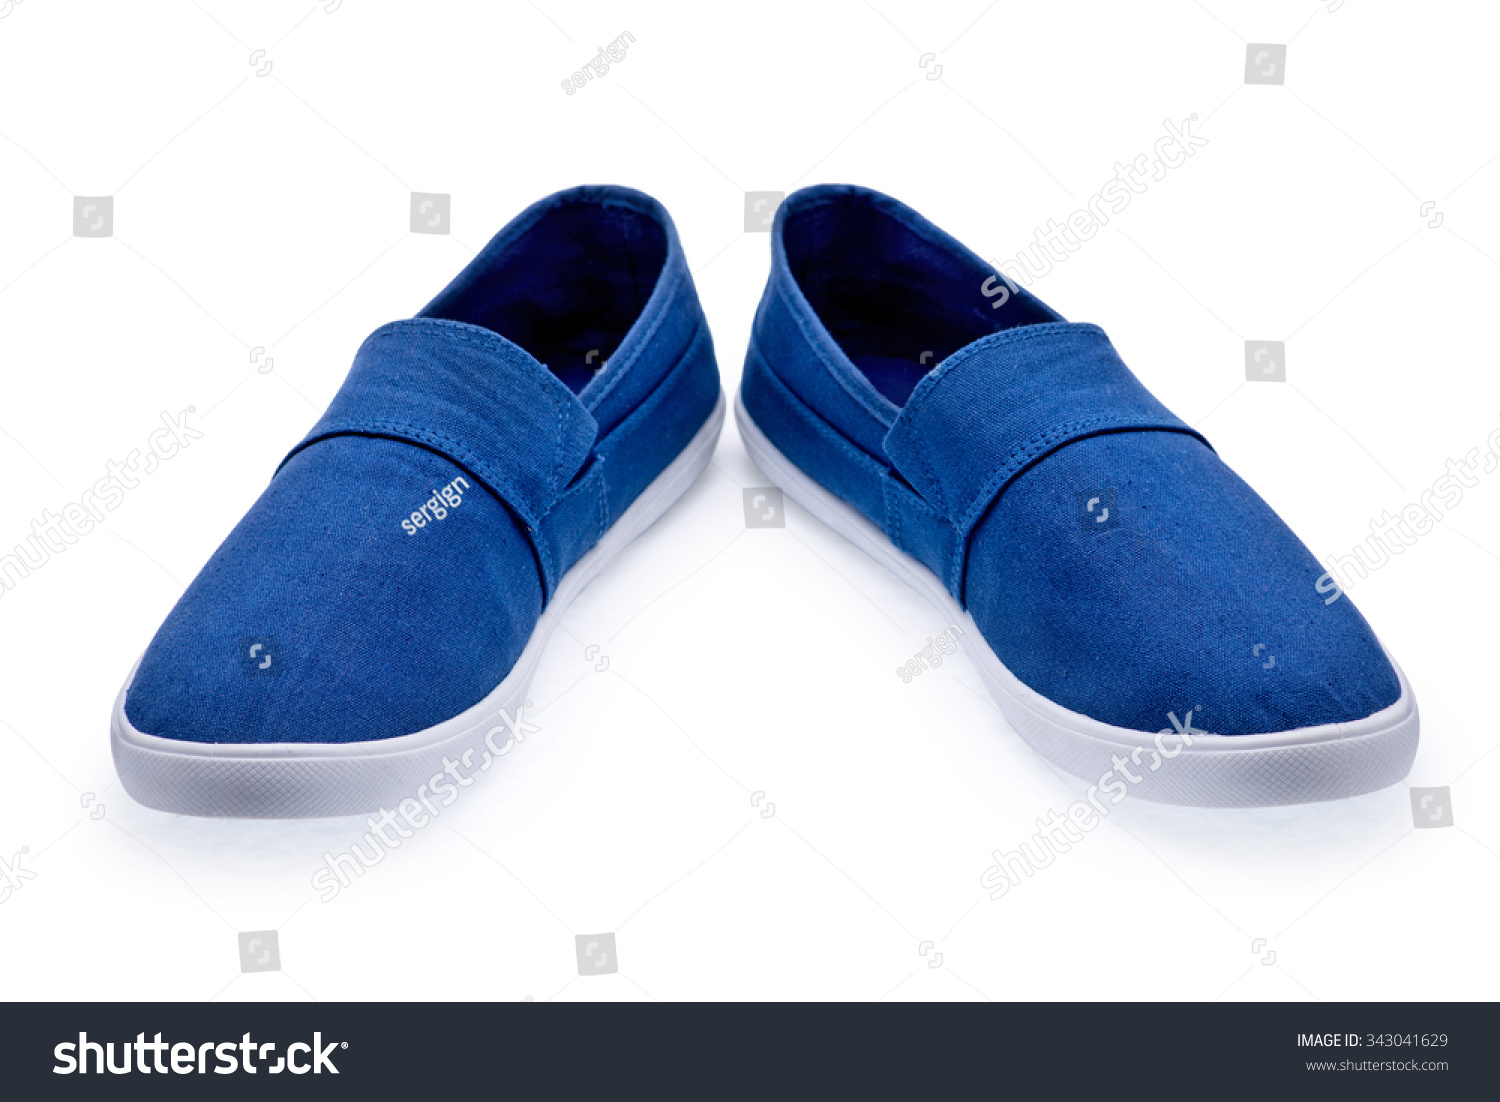 tennis shoes without laces